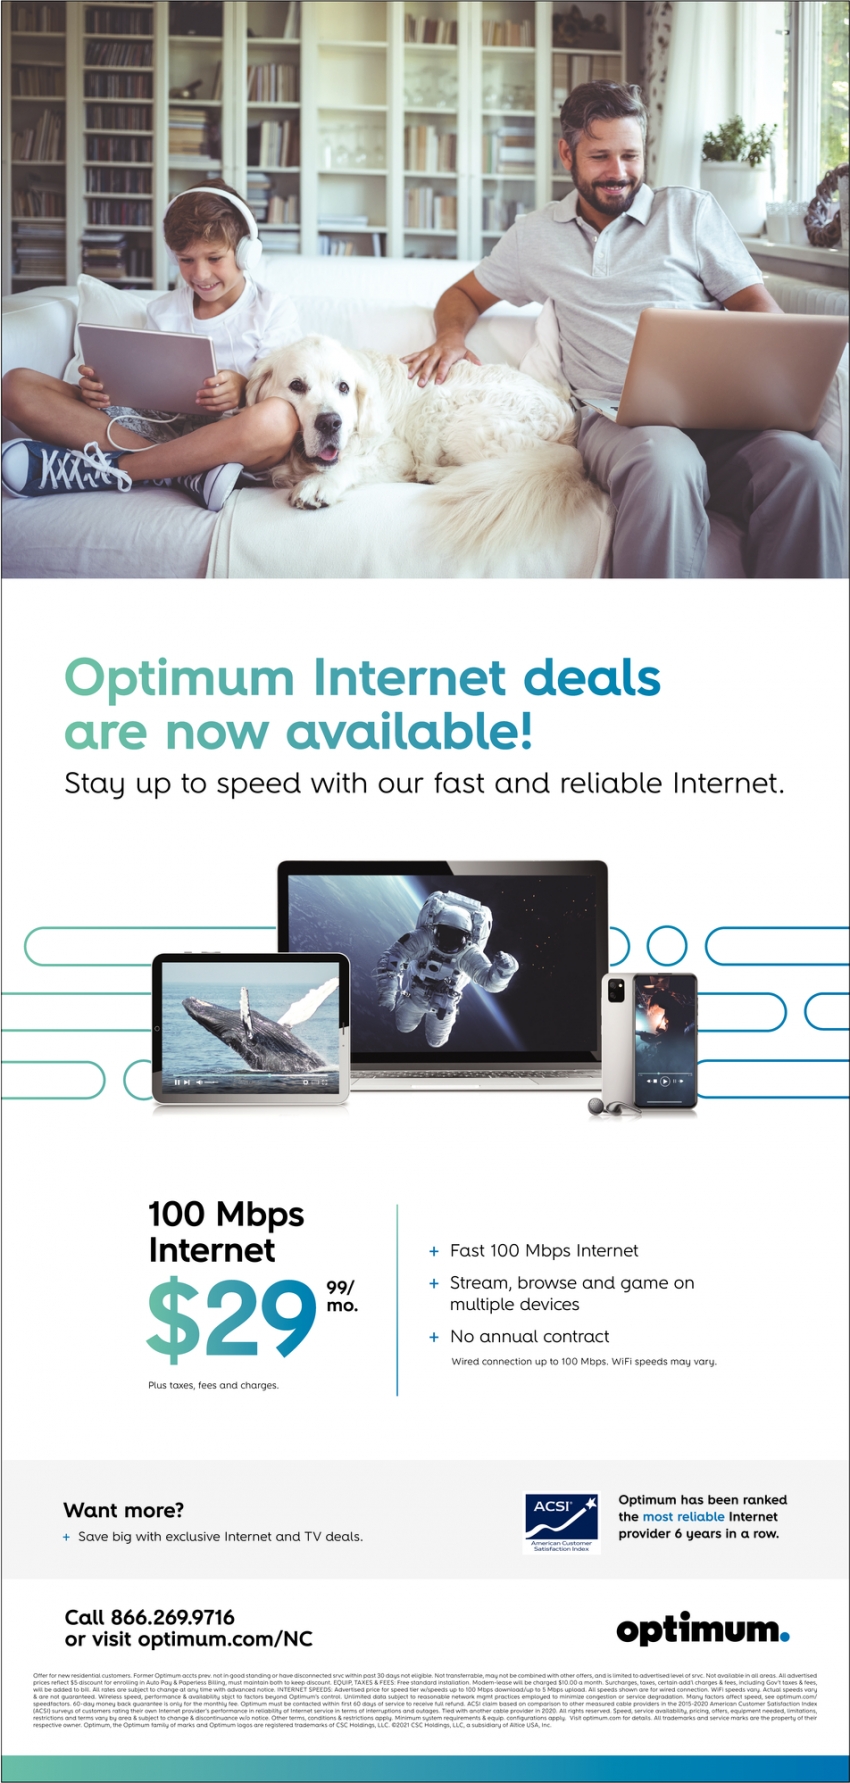 Optimum Internet Deals Are Now Available